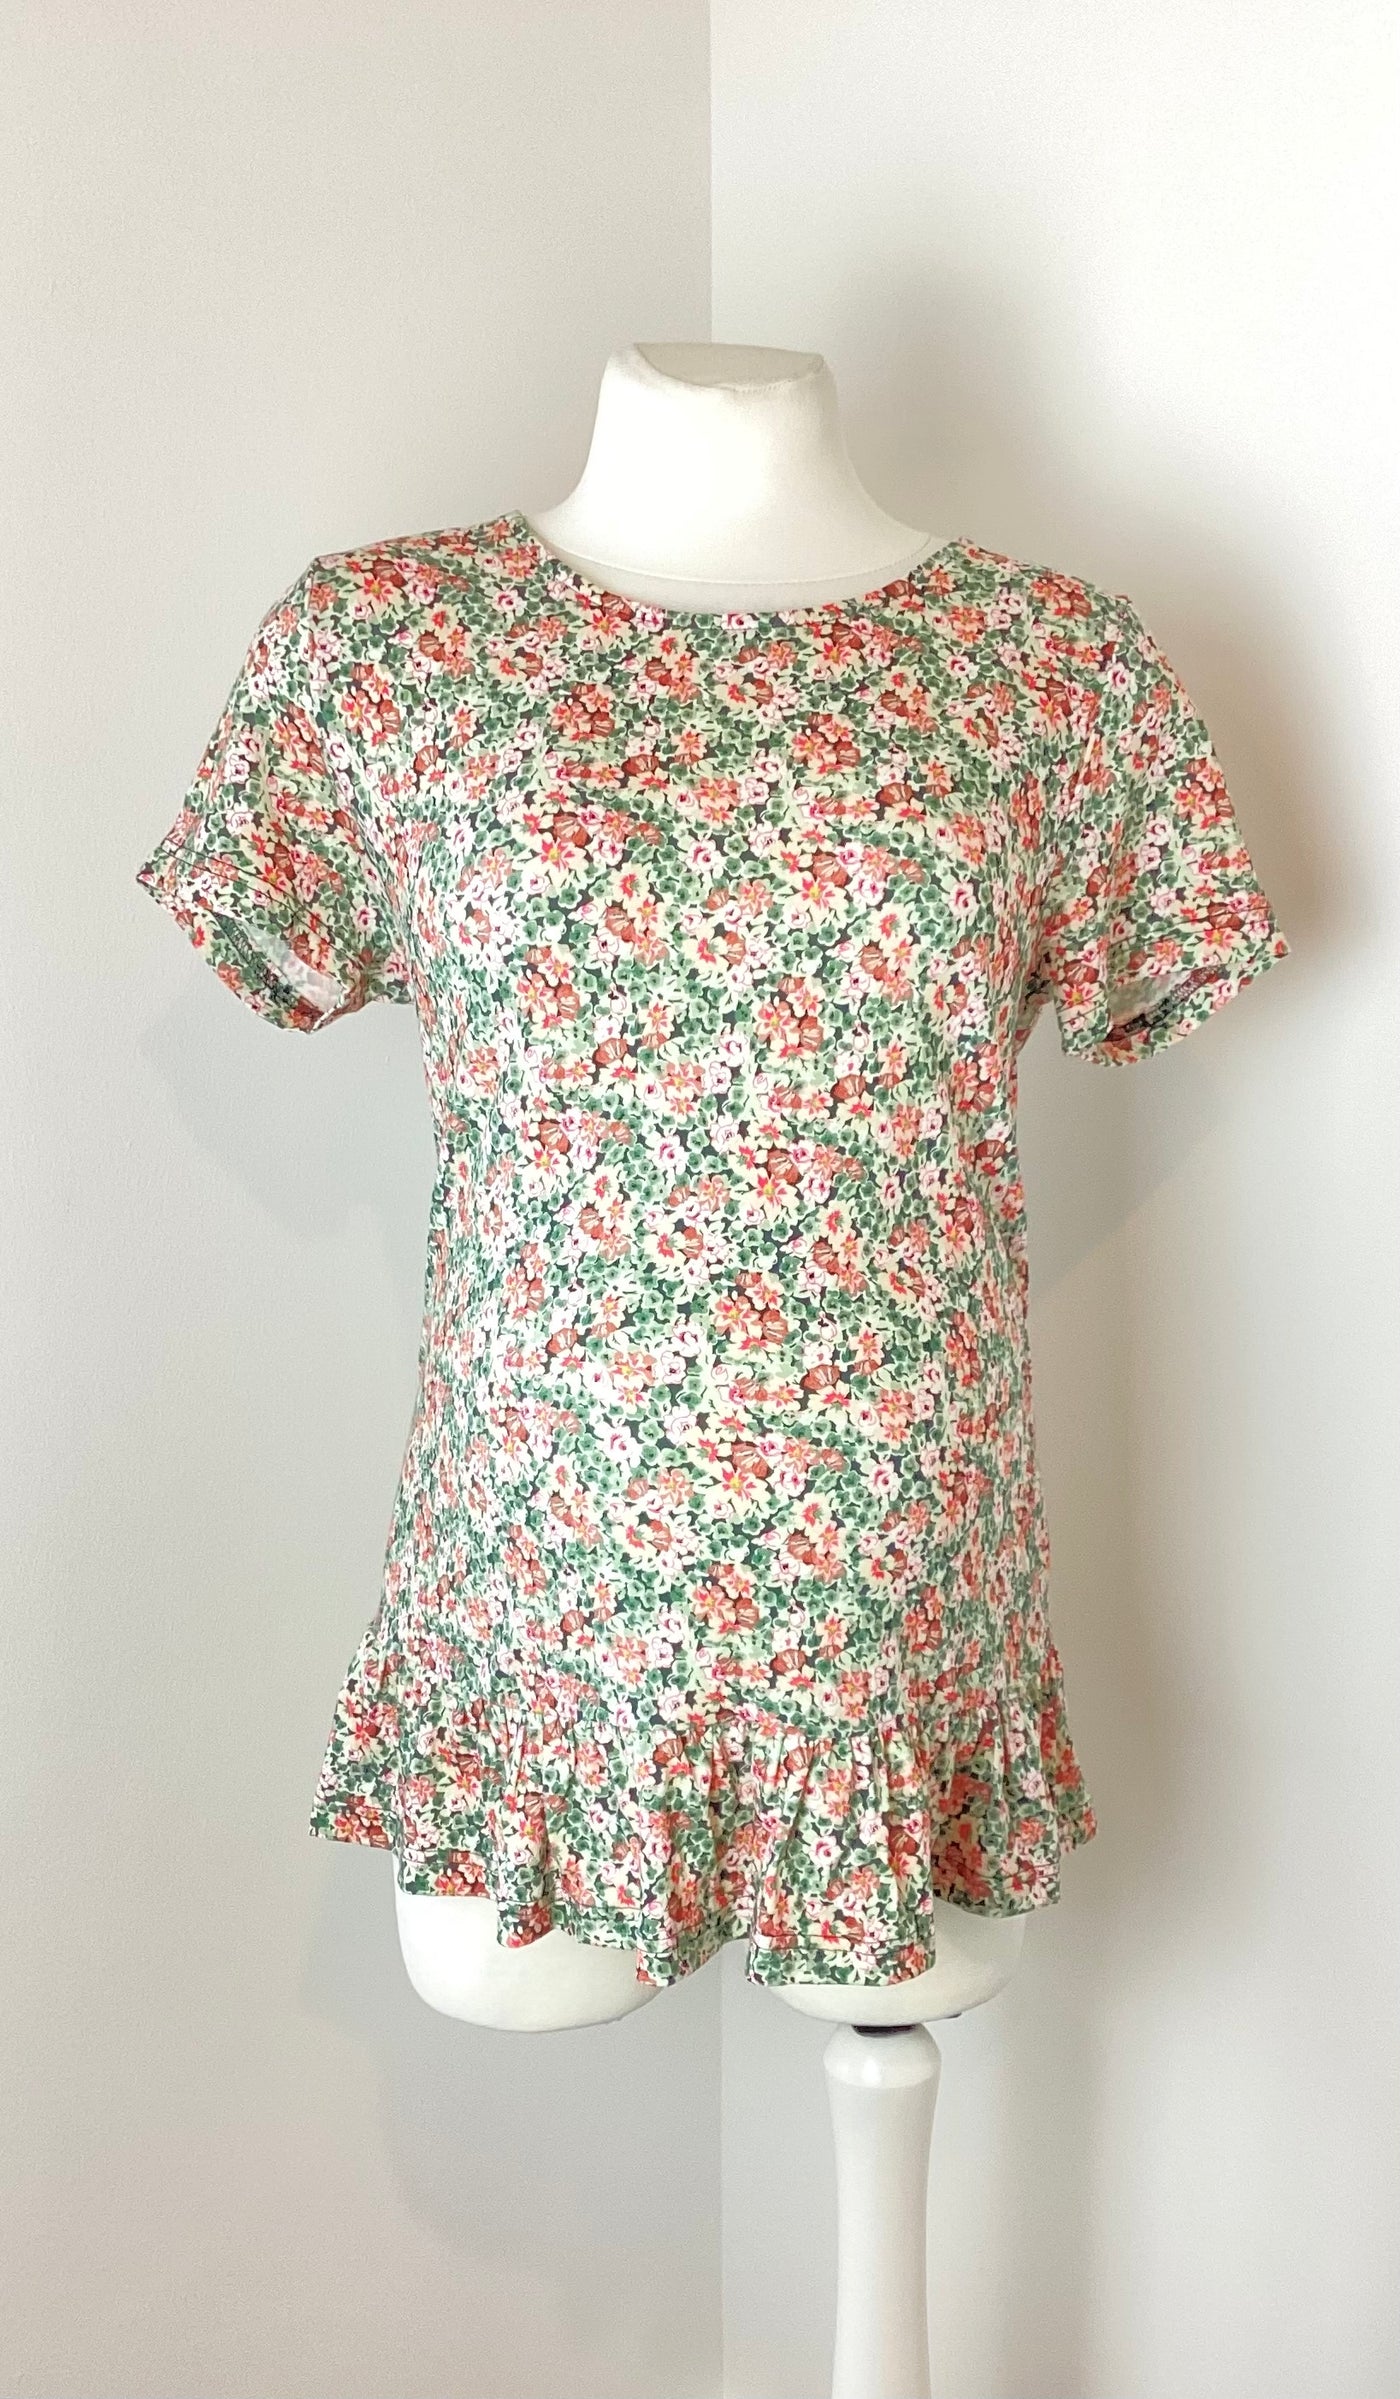 Mamalicious green, pink & white floral t-shirt top with bottom frill - Size L (Approx UK 12)